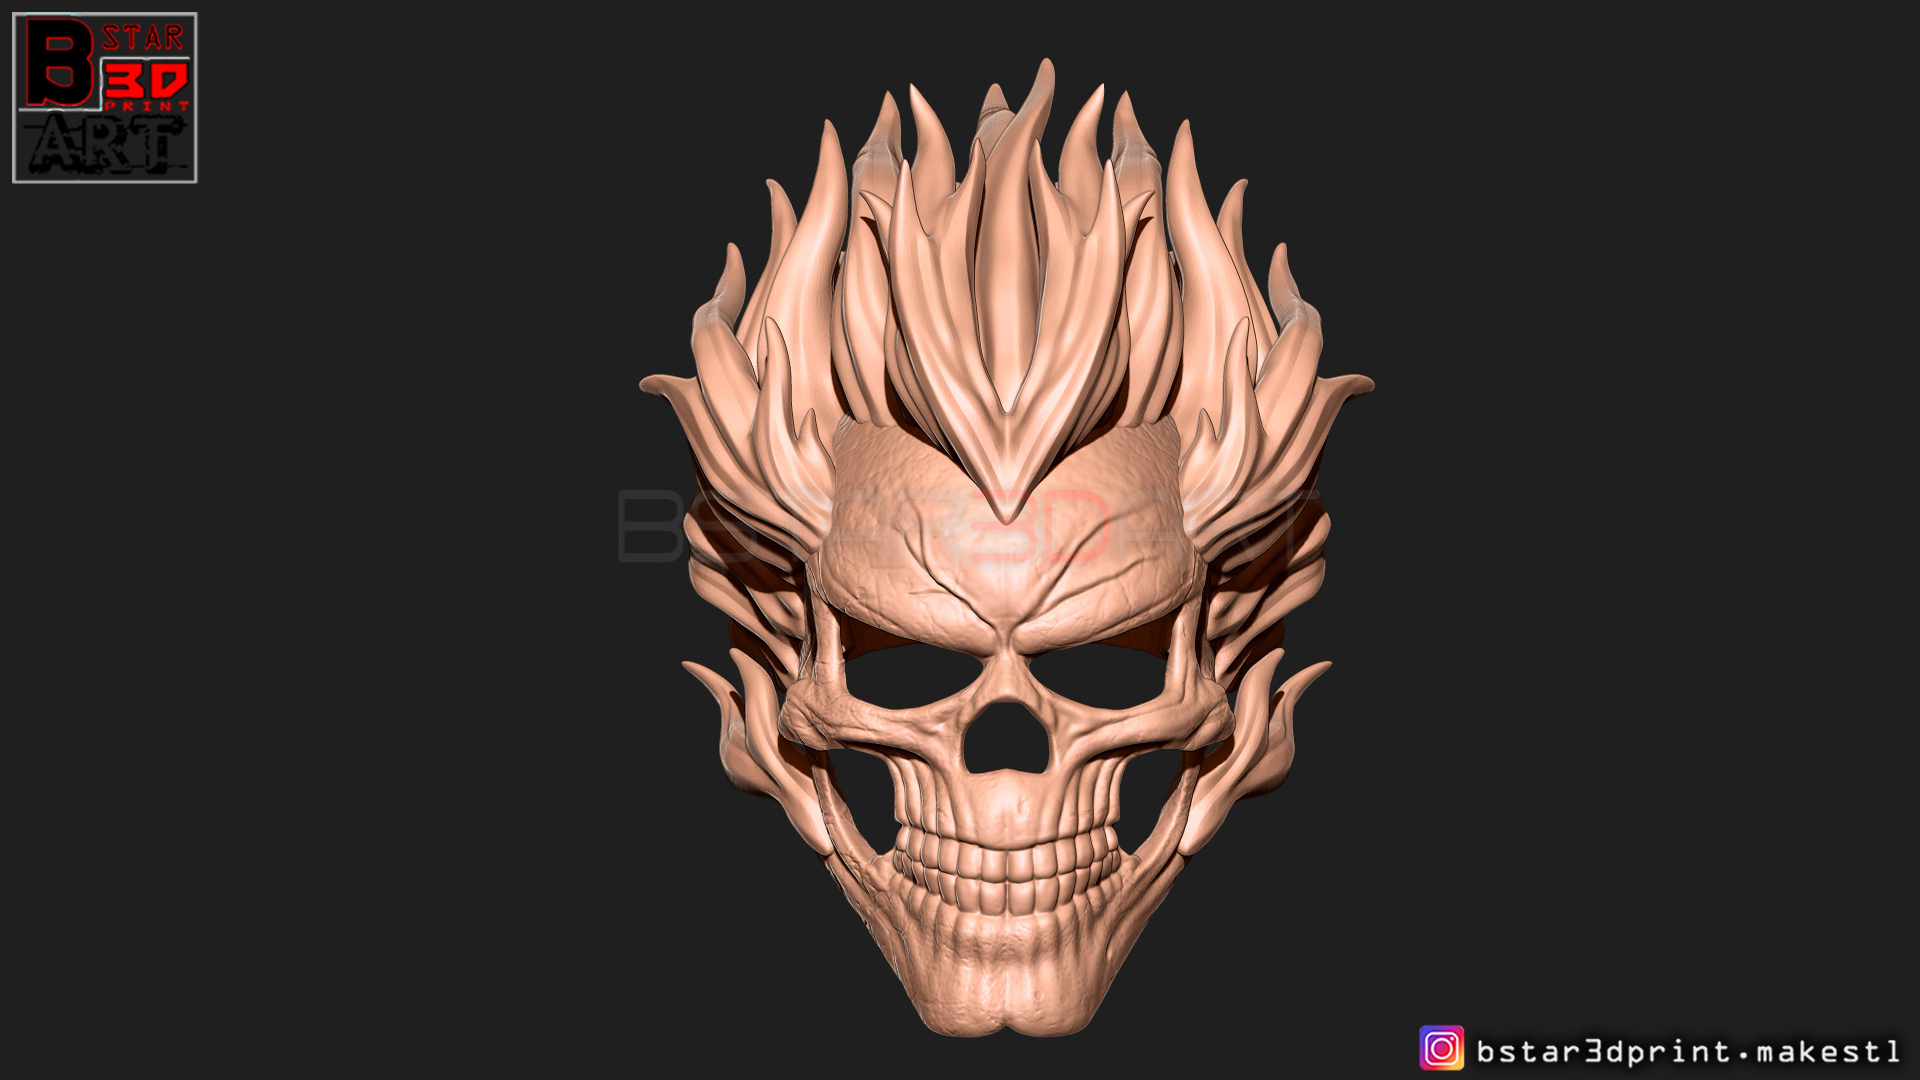 Ghost Rider mask -Agents of SHIELD - Marvel comics  3D Print 304920